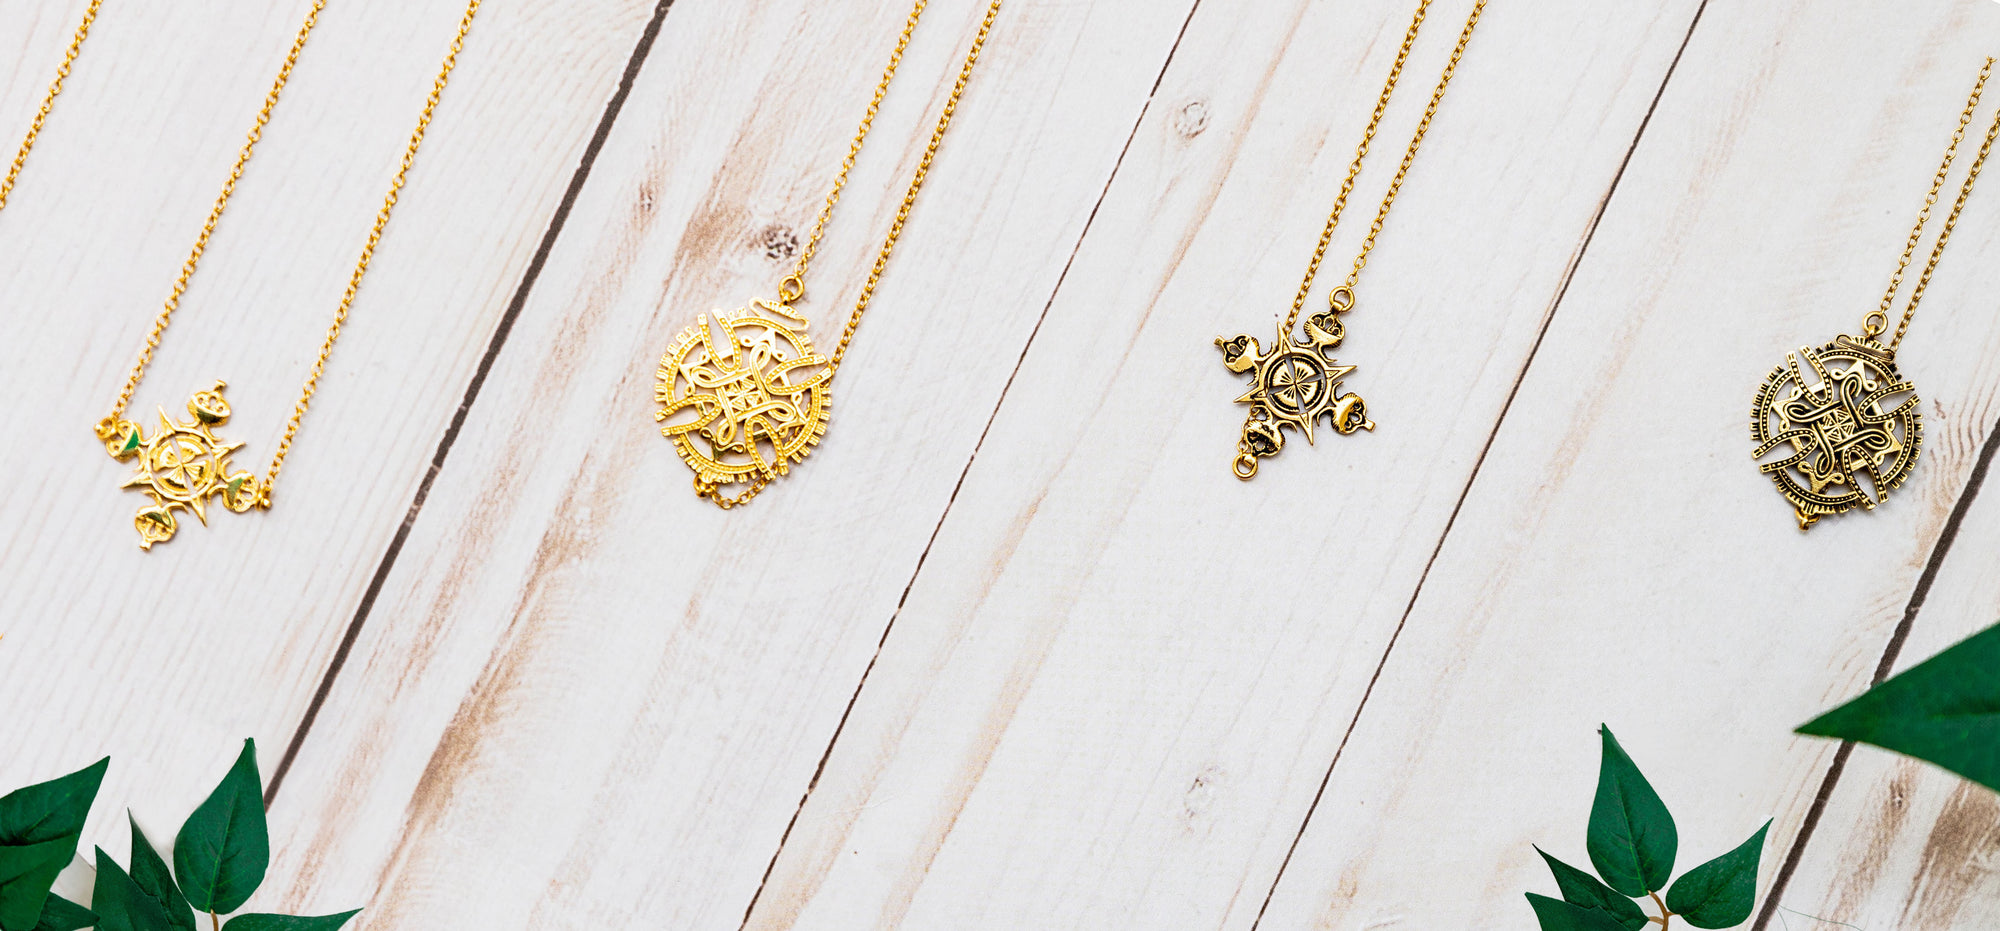 Yenae Ethiopian Cross Collection layed out, 14K gold plated necklaces